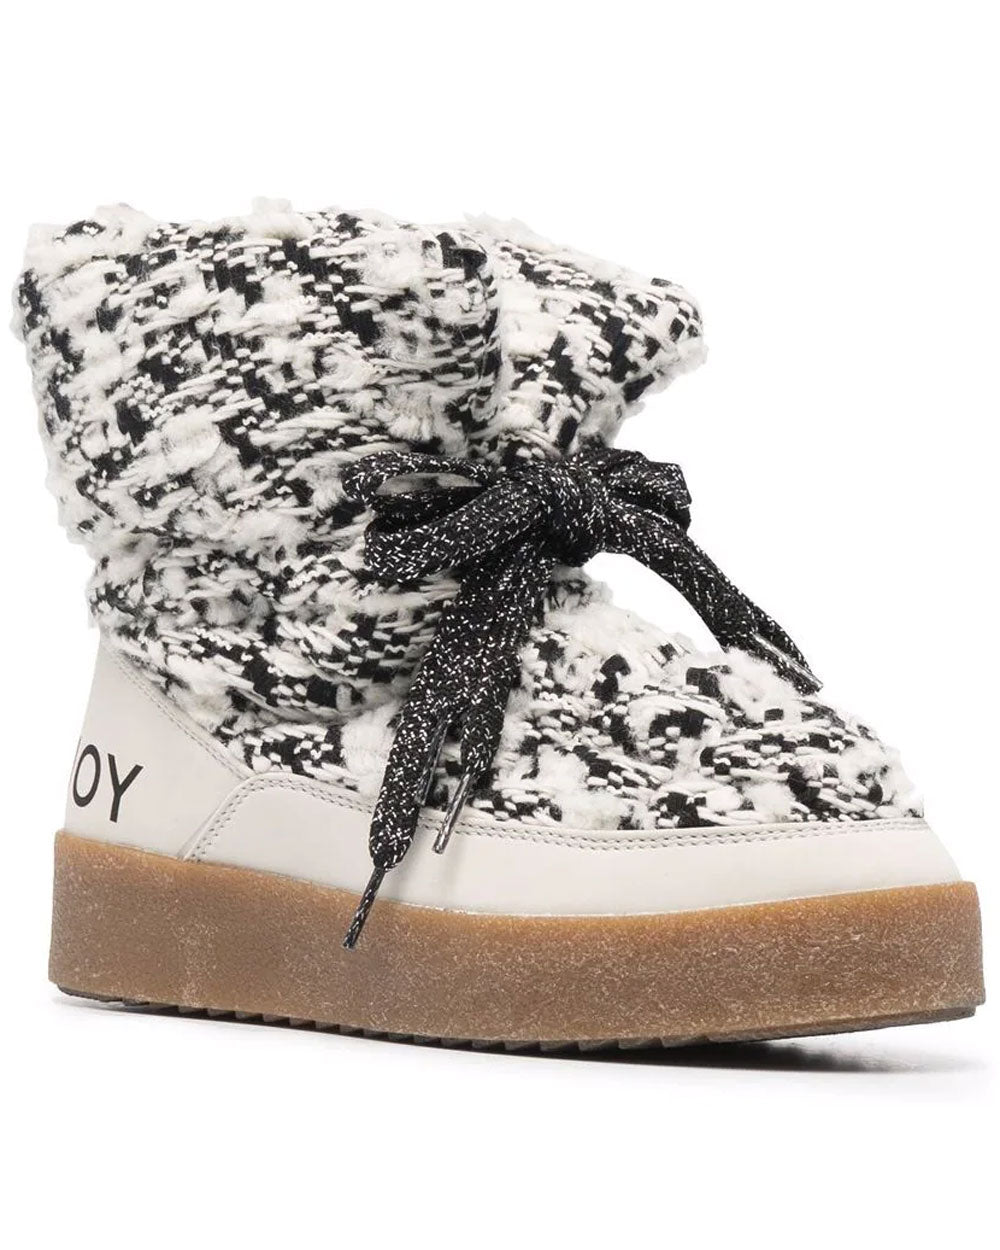 Puff Tweed Boot in Black and White